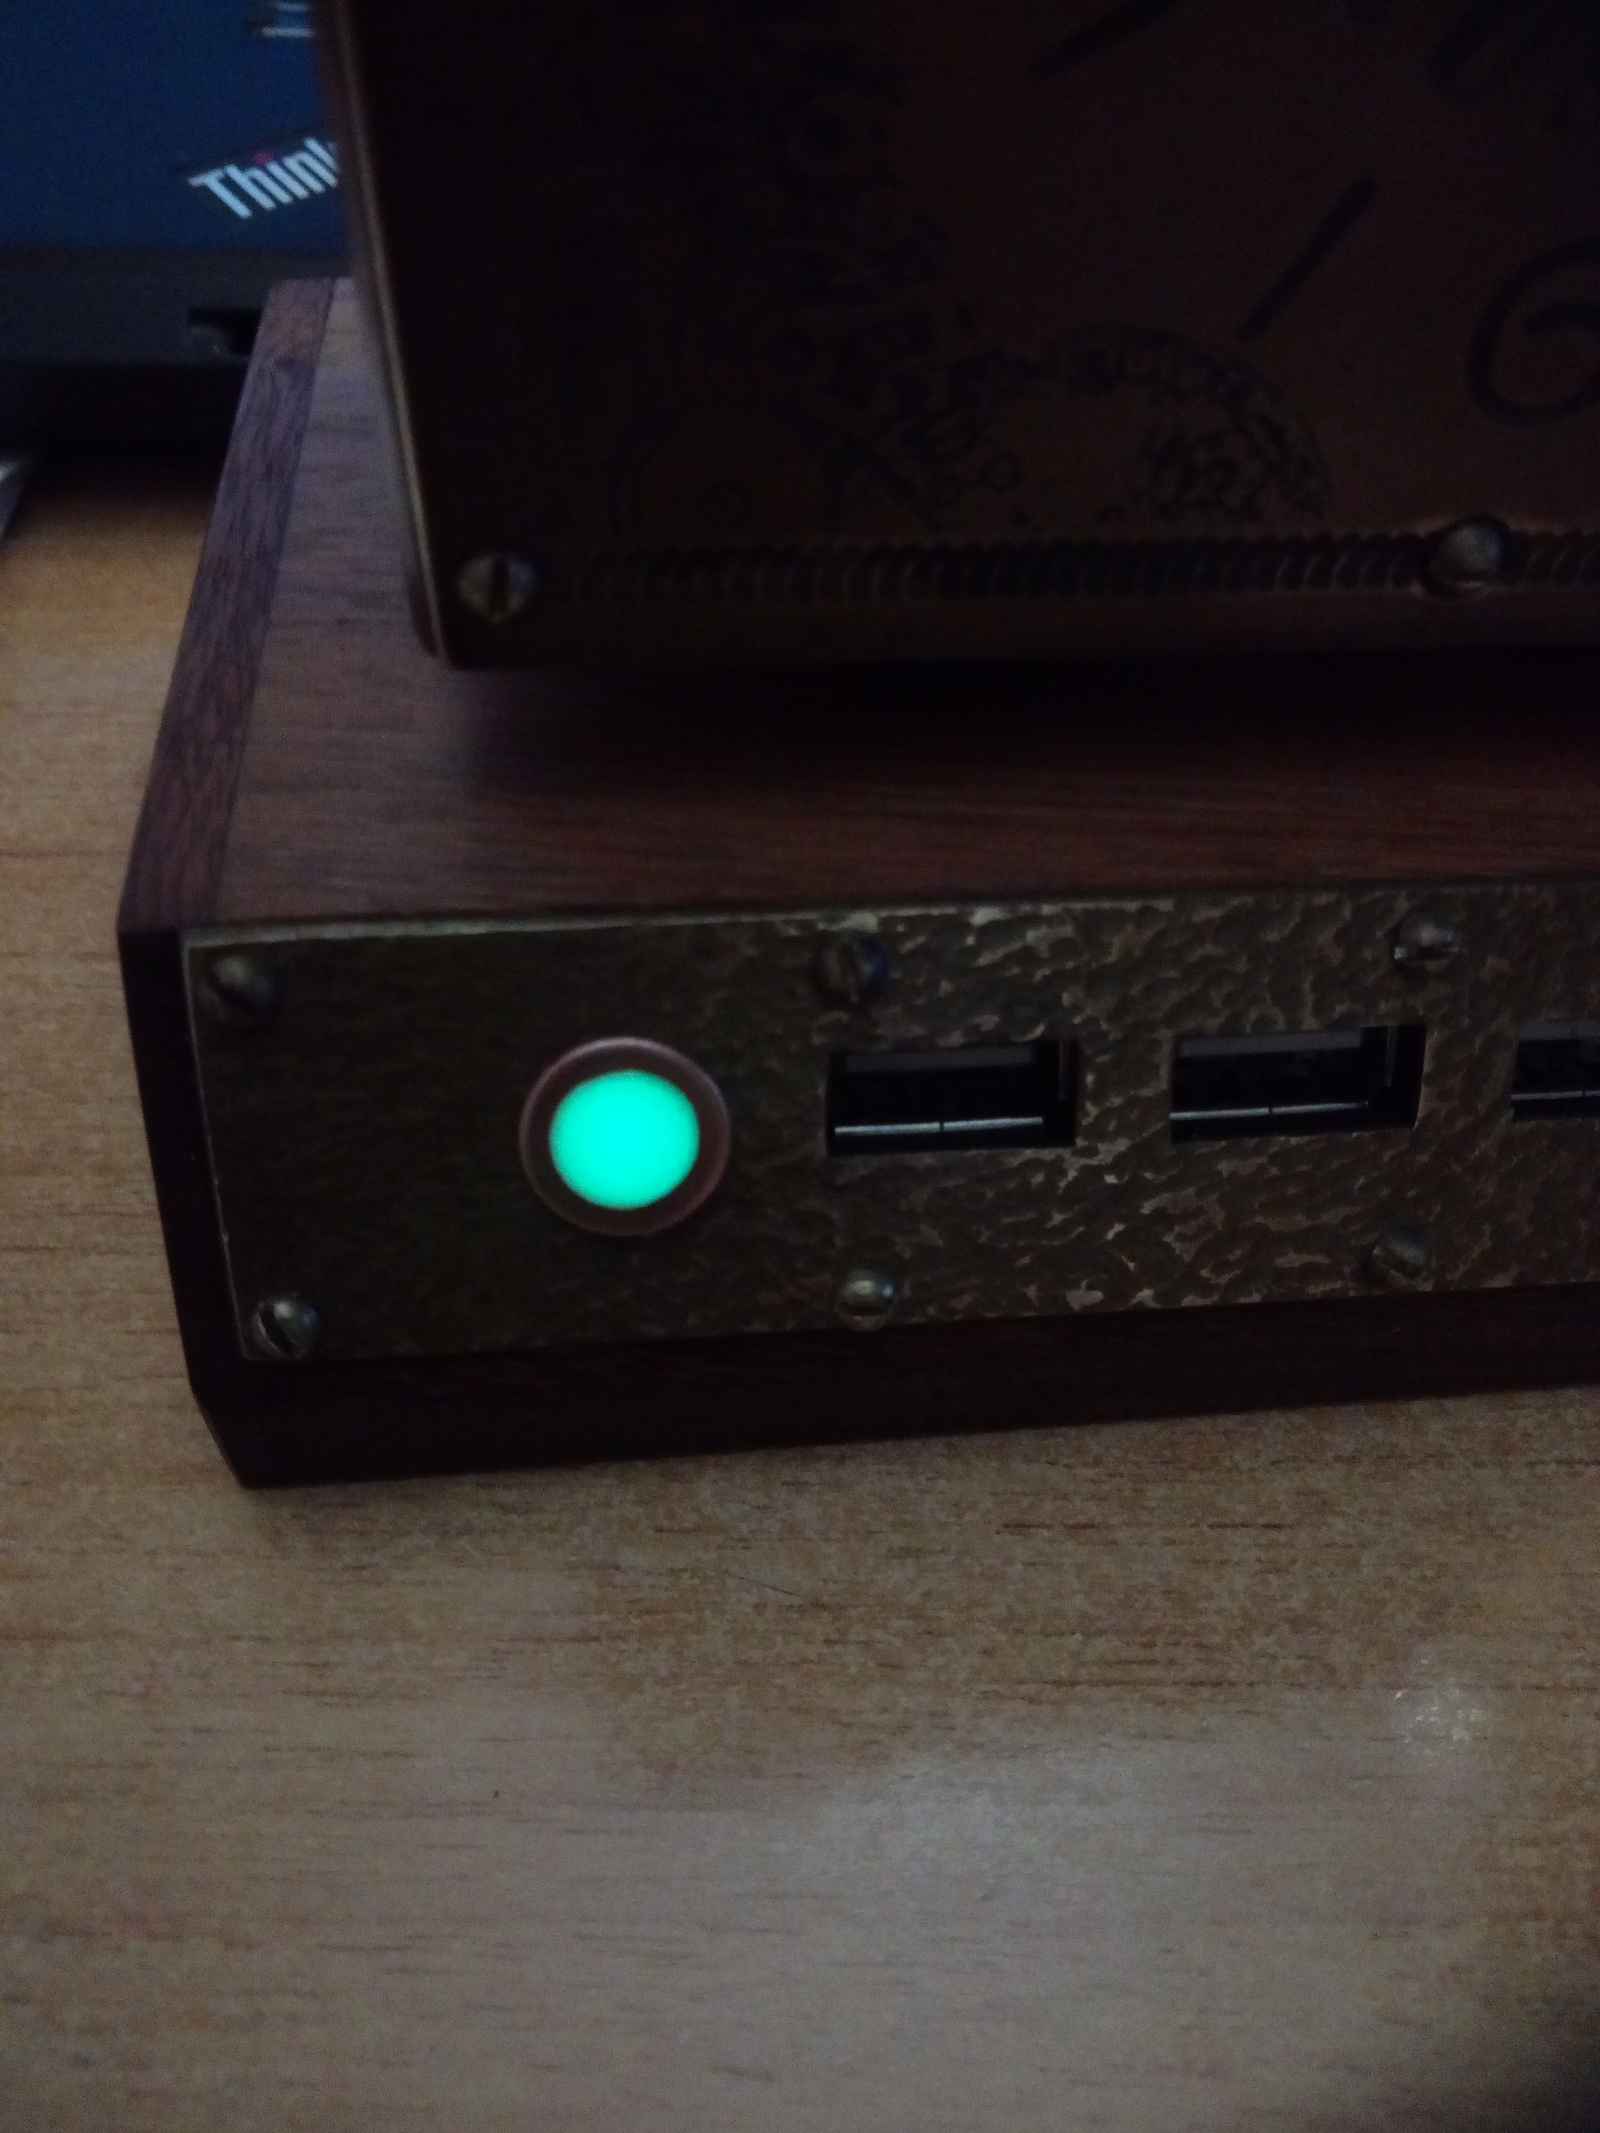 USB hub and stationery stand in one. - My, Needlework without process, Panerai, USB, Stand, , Presents, Longpost